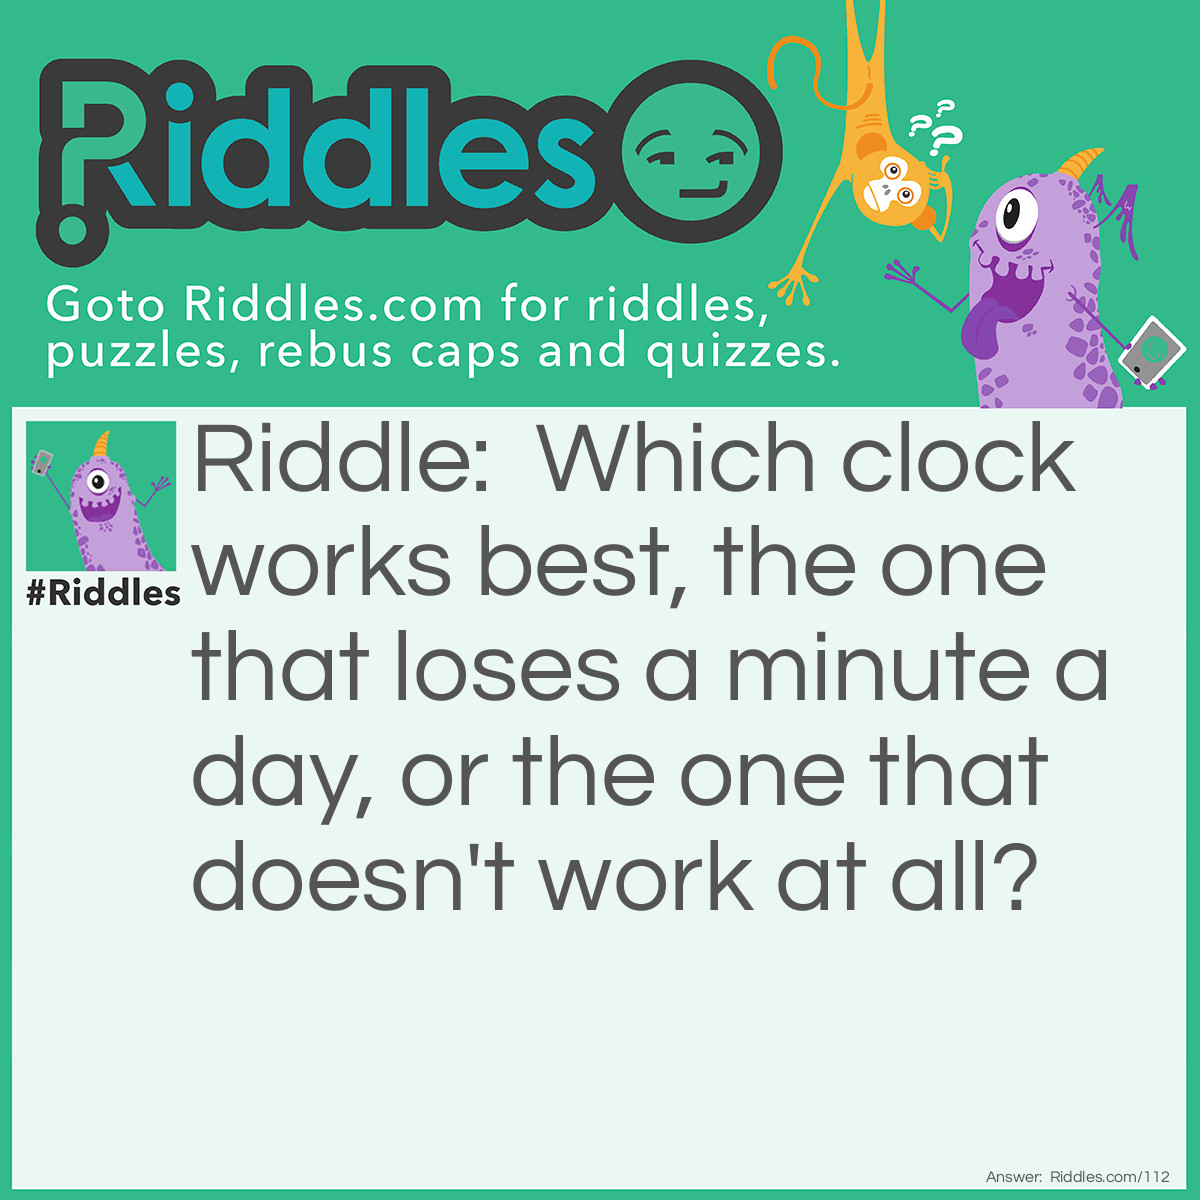 Riddle: Which clock works best, the one that loses a minute a day, or the one that doesn't work at all? Answer: The one that doesn't work is best as it will always be correct twice a day, but the one that loses a minute a day will not be correct again for 720 days (losing 720 minutes or 12 hours).